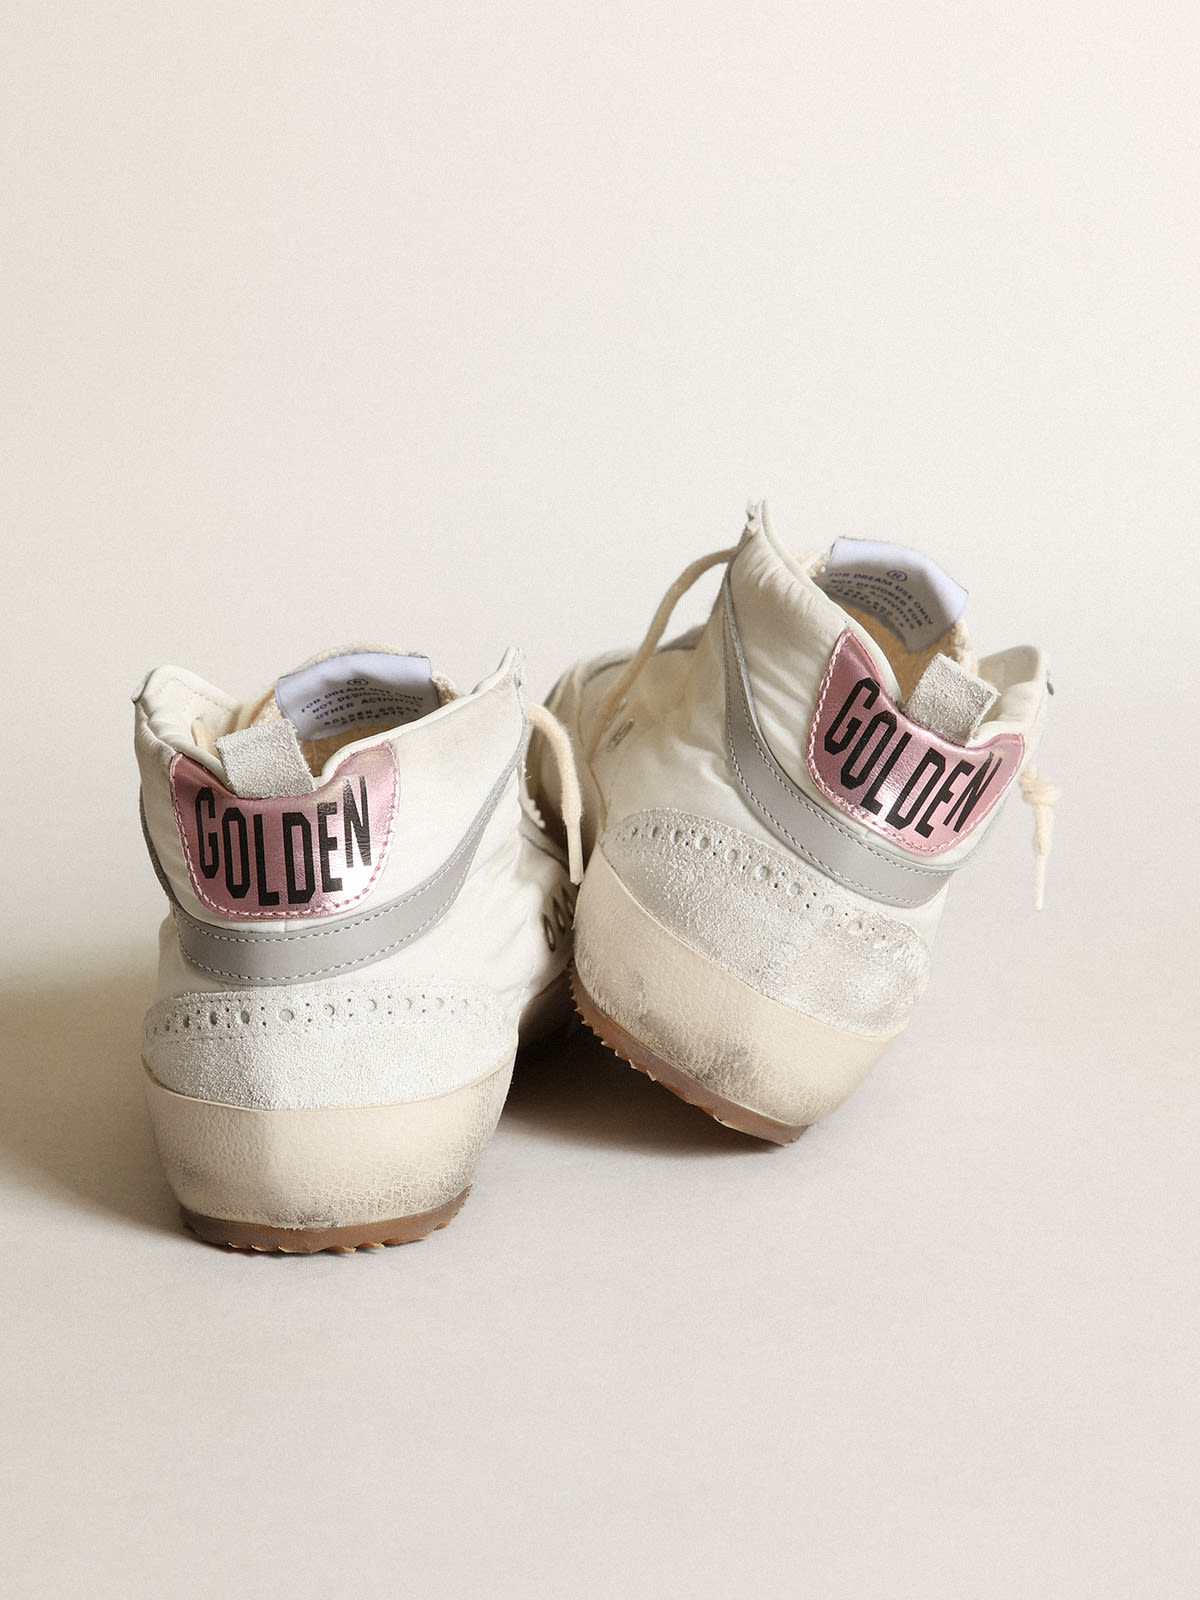 Golden Goose - Mid Star LTD sneakers in white nylon with leopard-print pony skin star and pink metallic leather heel tab in 